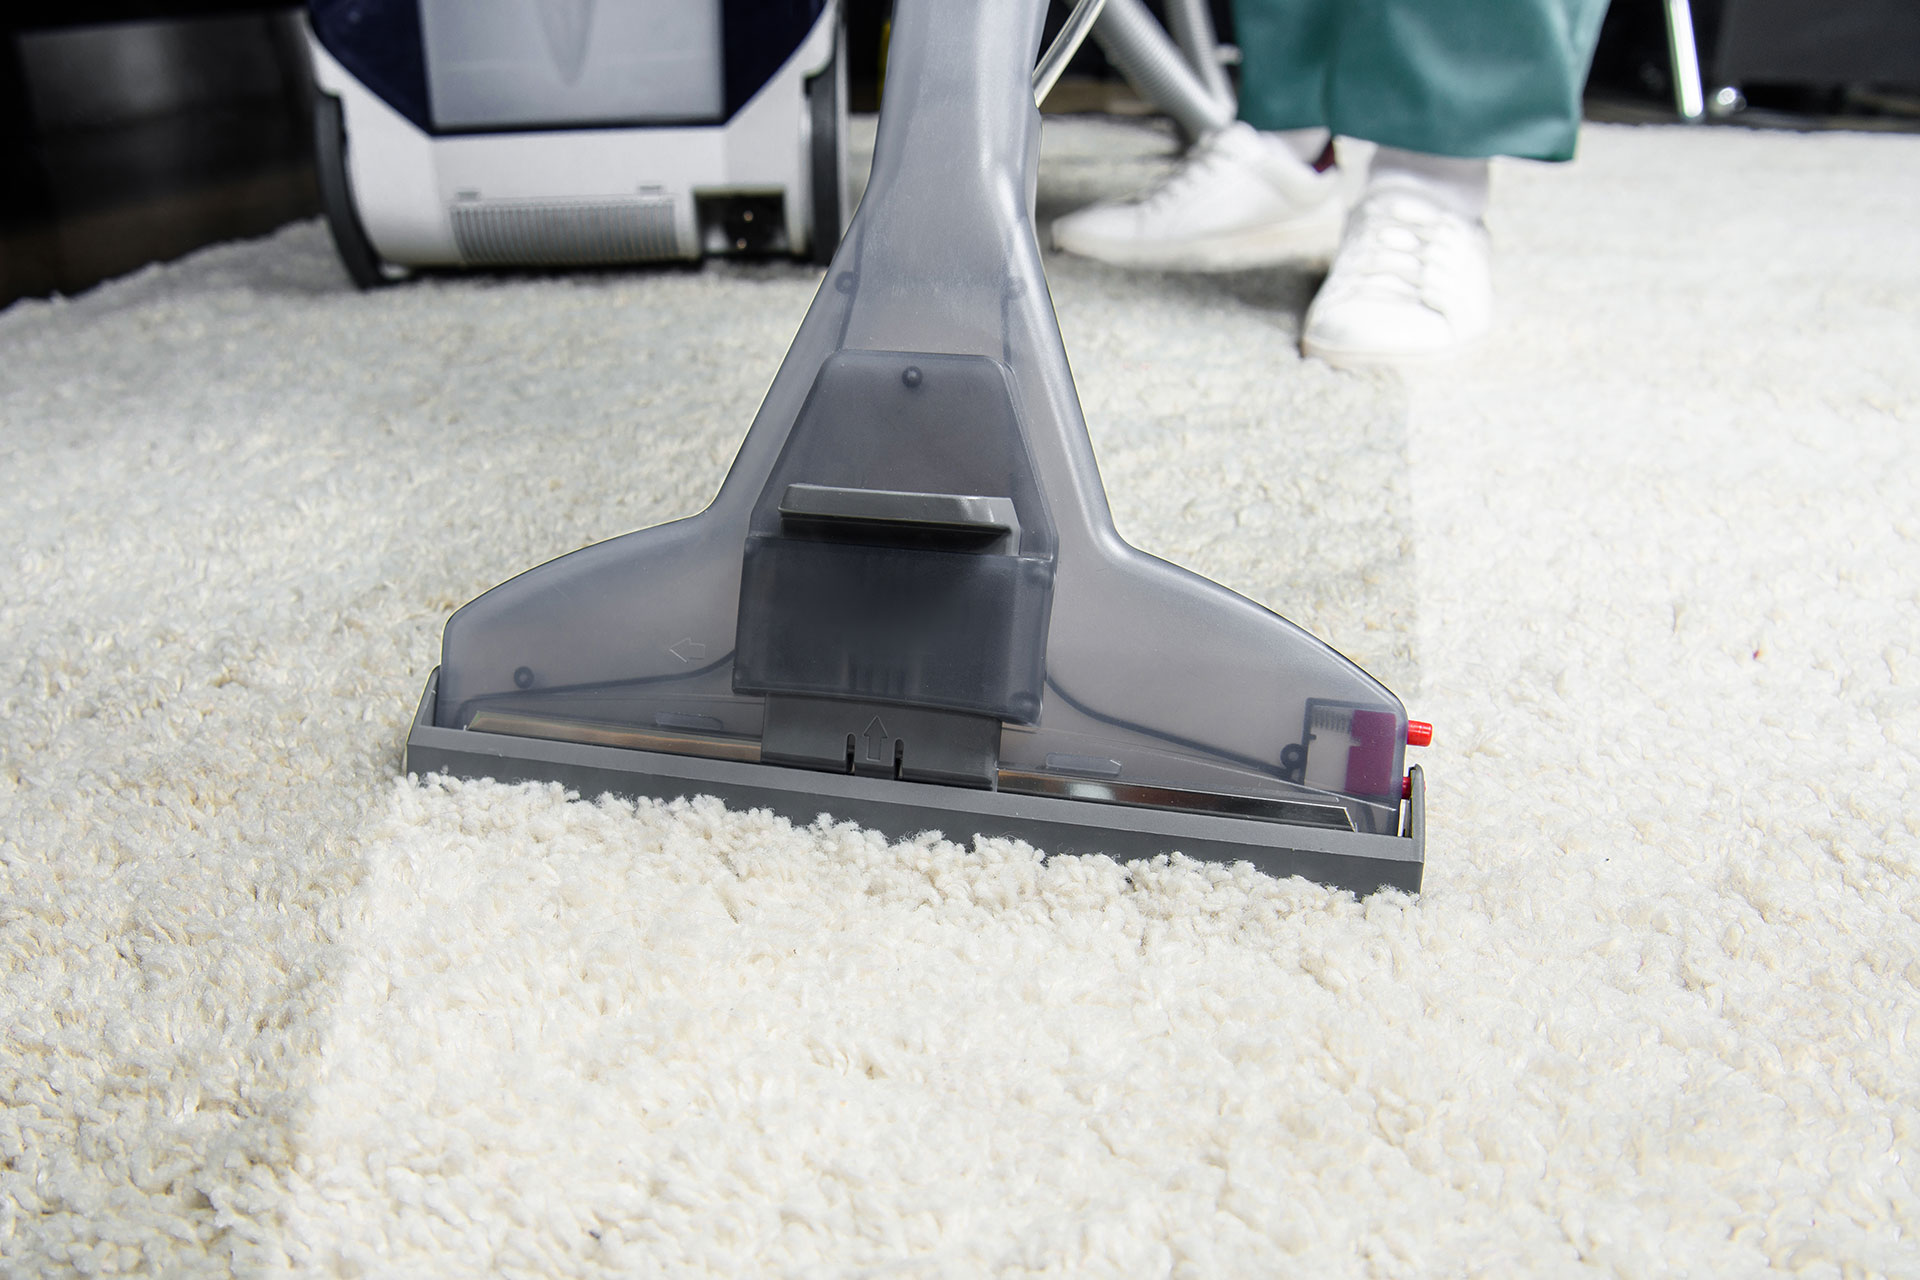 How do we clean your carpet? see here